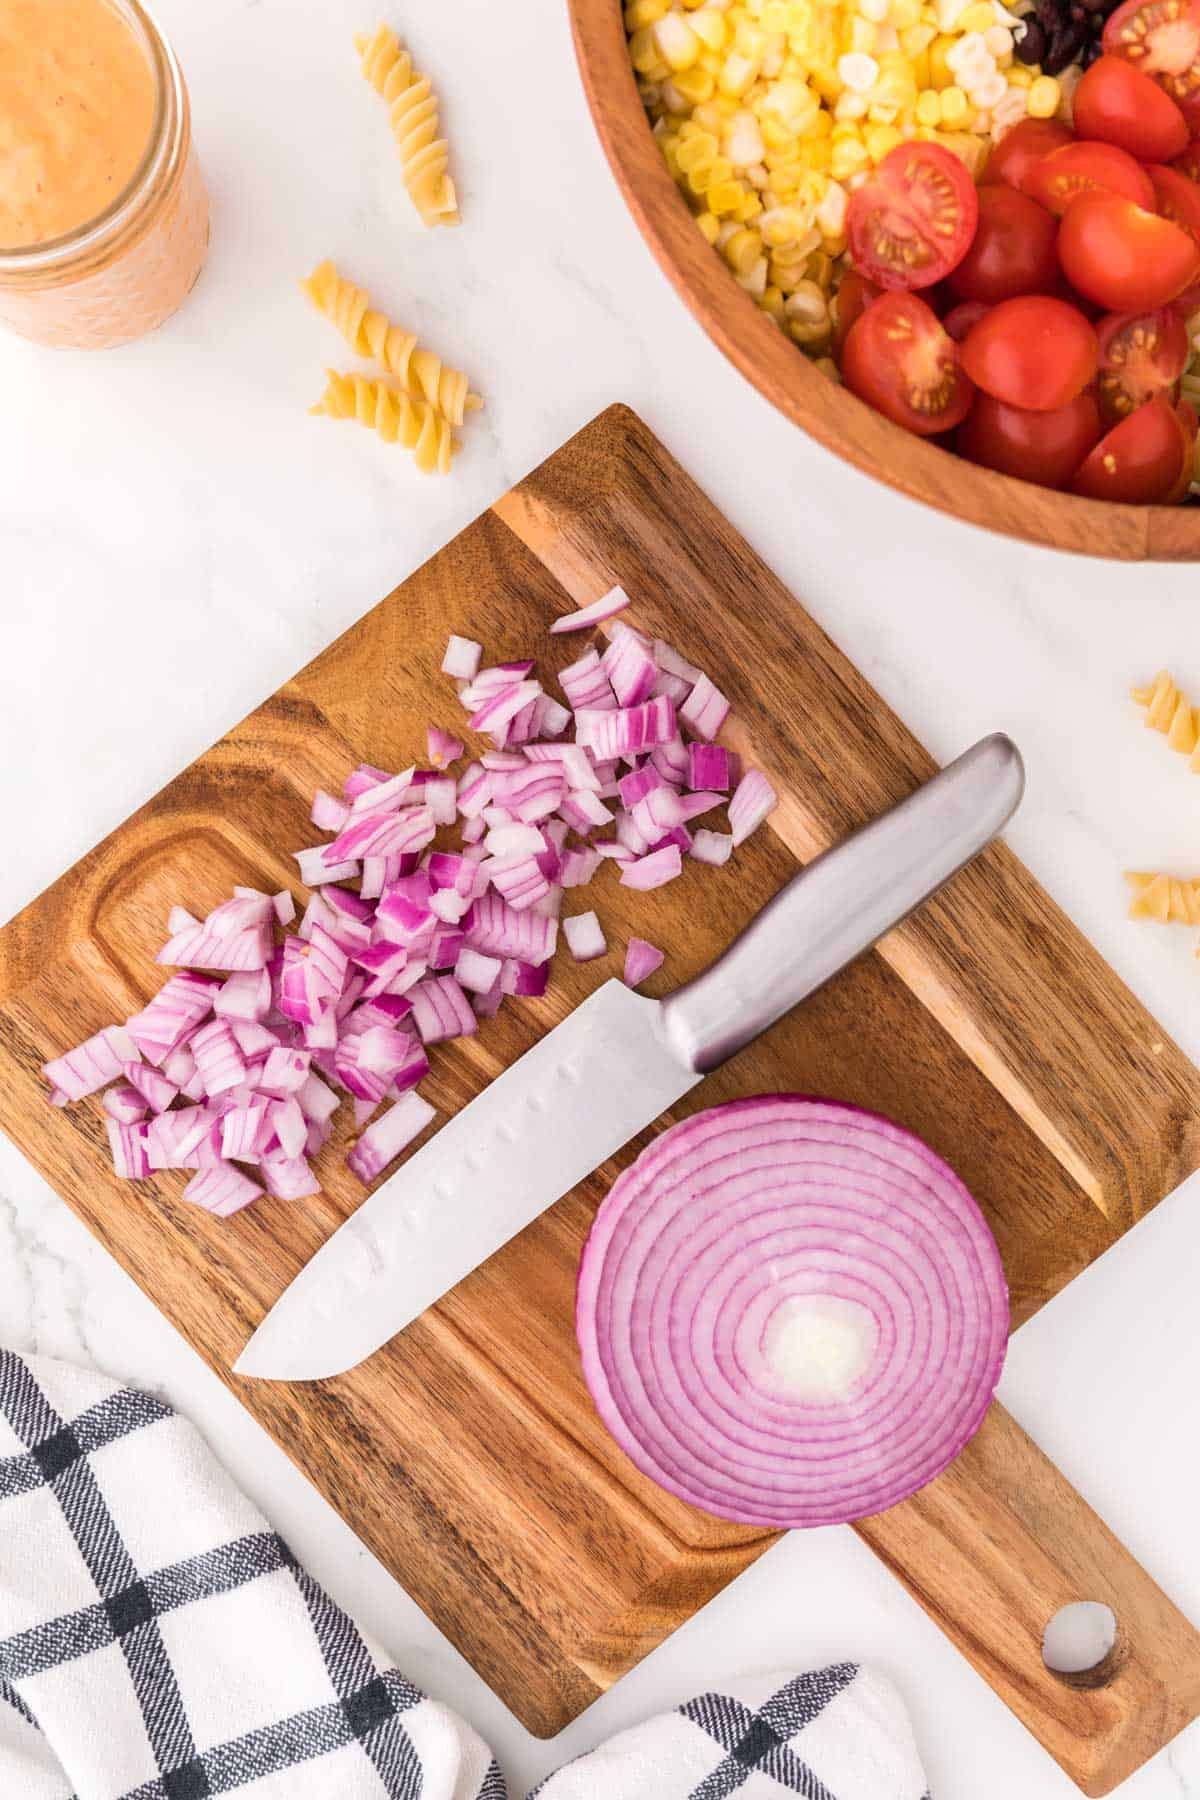 red onions cut up on a cutting board